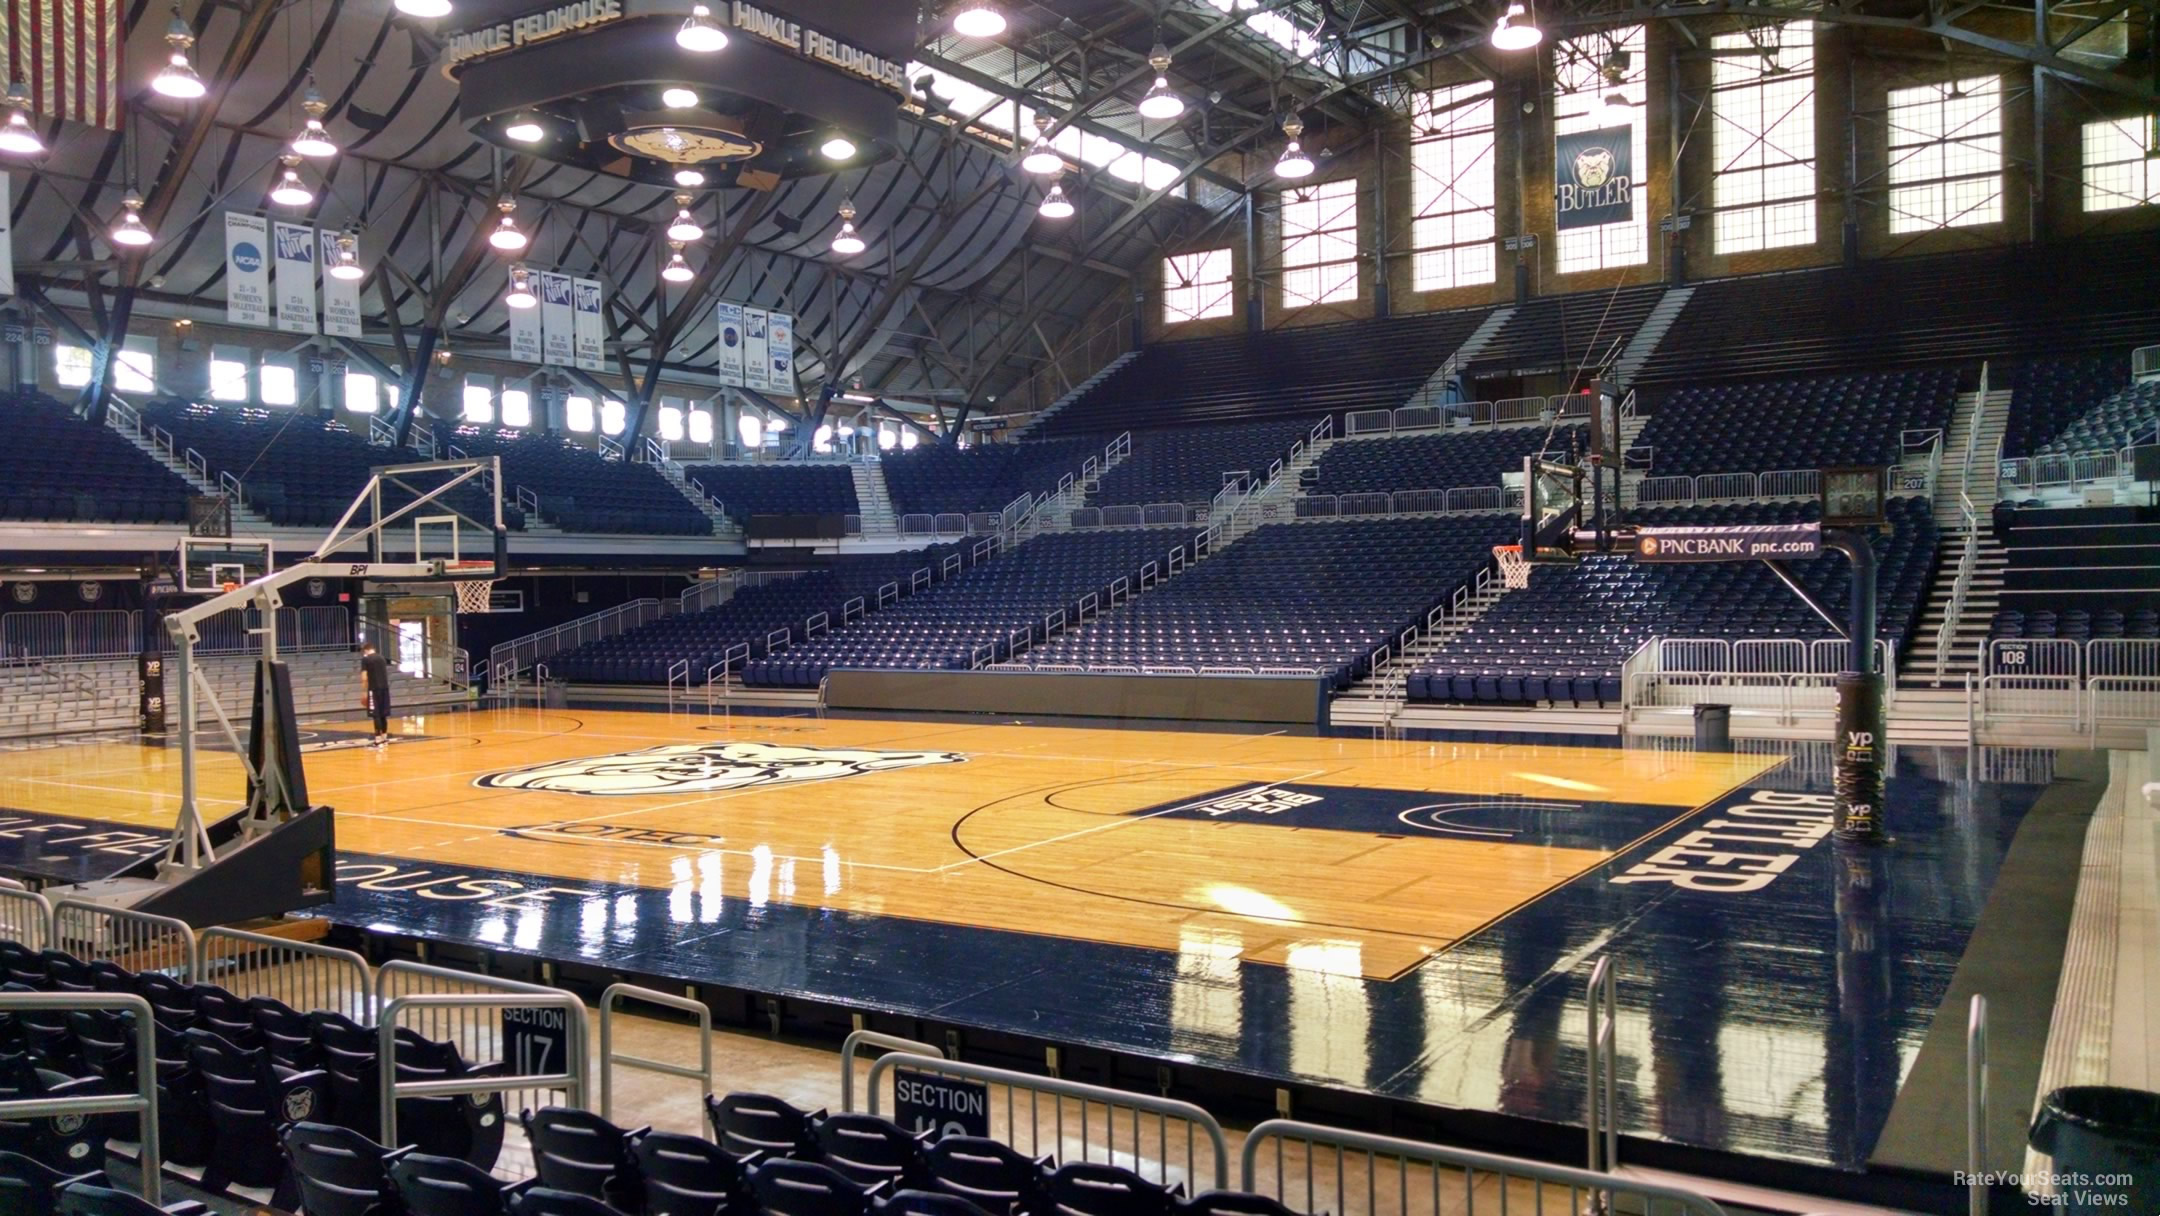 section 116, row 7 seat view  - hinkle fieldhouse